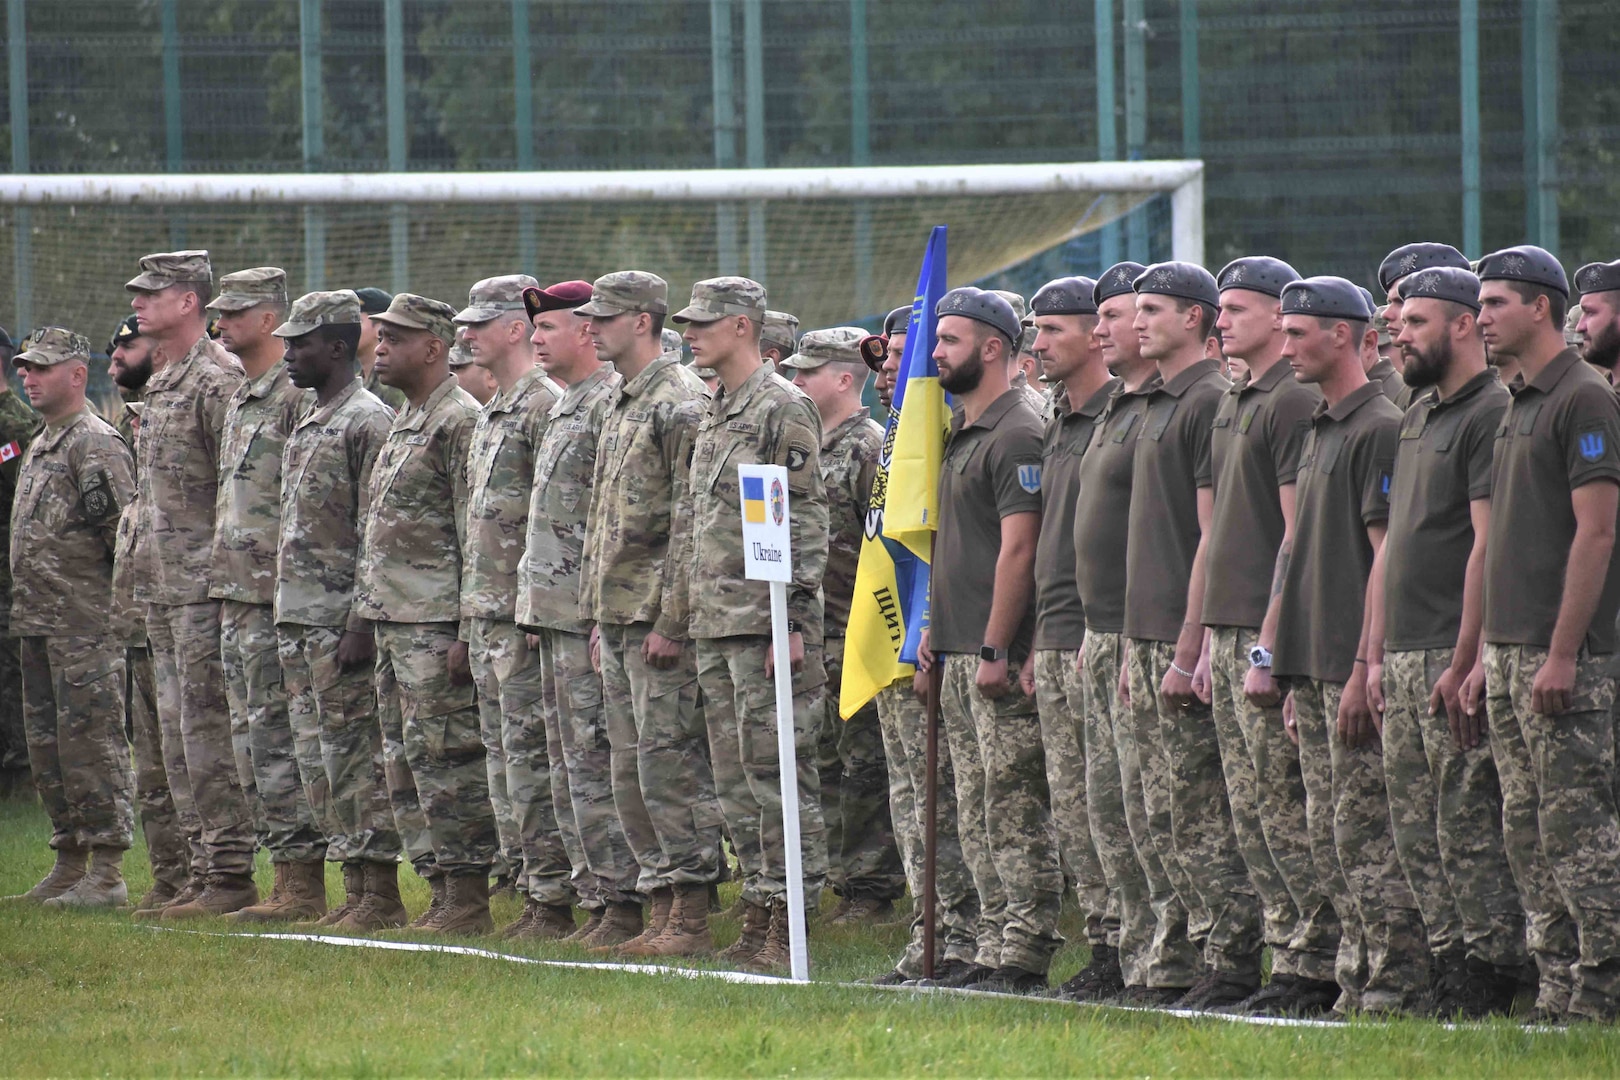 The California Army National Guard's 115th Regional Support Group took part in the opening ceremonies of Rapid Trident 2019 at the International Peacekeeping Security Centre (IPSC) near Yavoriv, Ukraine, Sept. 16, 2019. Rapid Trident is an annual, multinational exercise that supports joint combined interoperability among the partner militaries of Ukraine and the United States, as well as Partnership for Peace nations and NATO allies.